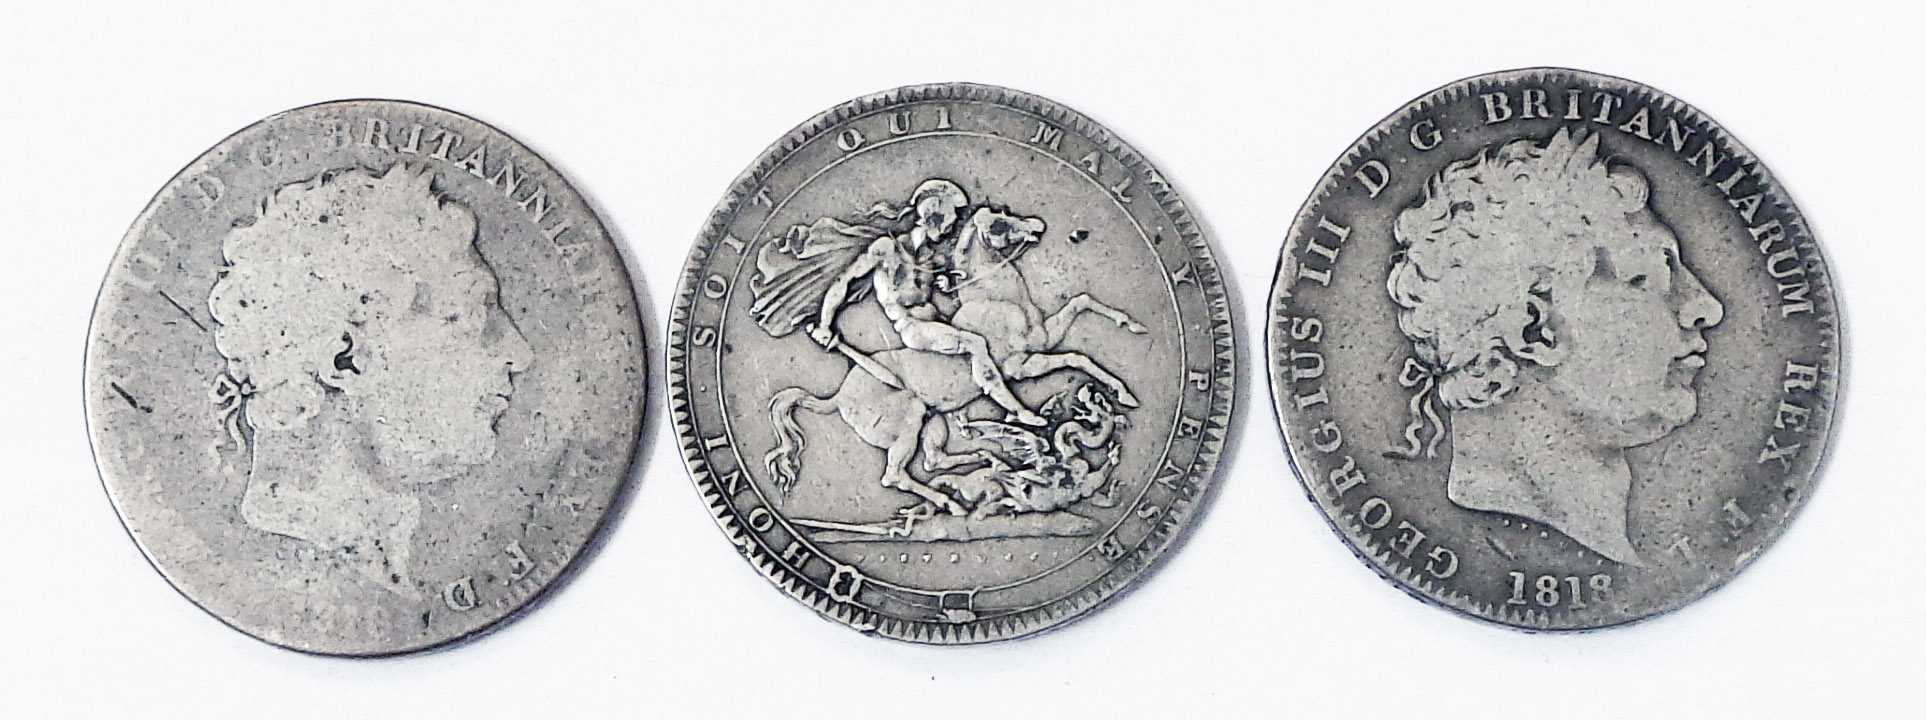 Three 1818 George III silver Crowns - FR, AG, VG - Image 2 of 2